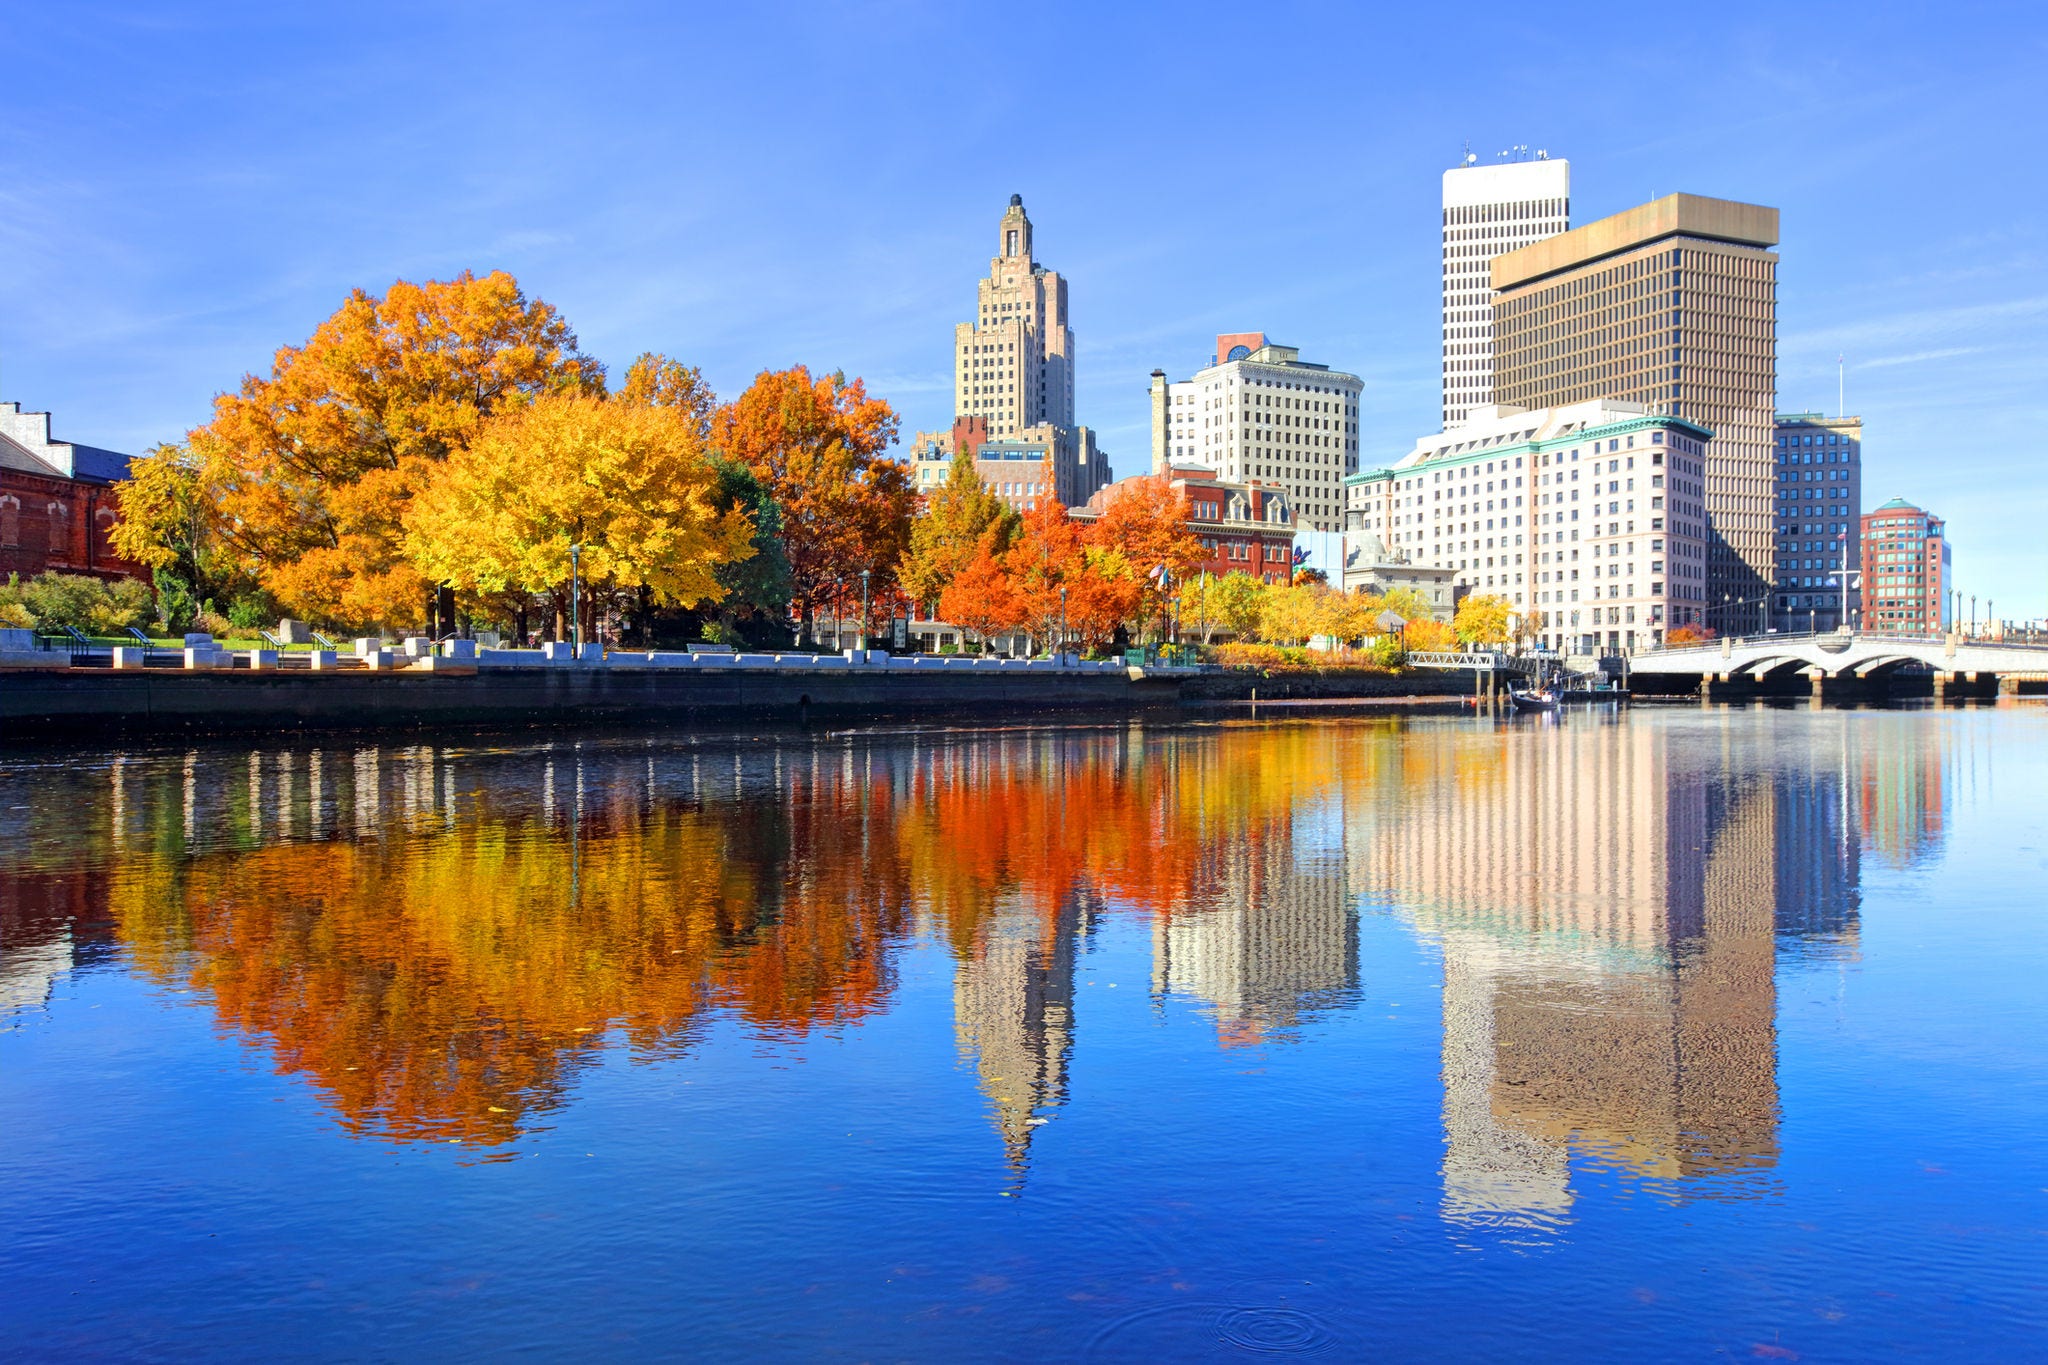 Providence is the capital and most populous city of the U.S. state of Rhode Island and is one of the oldest cities in the United States.